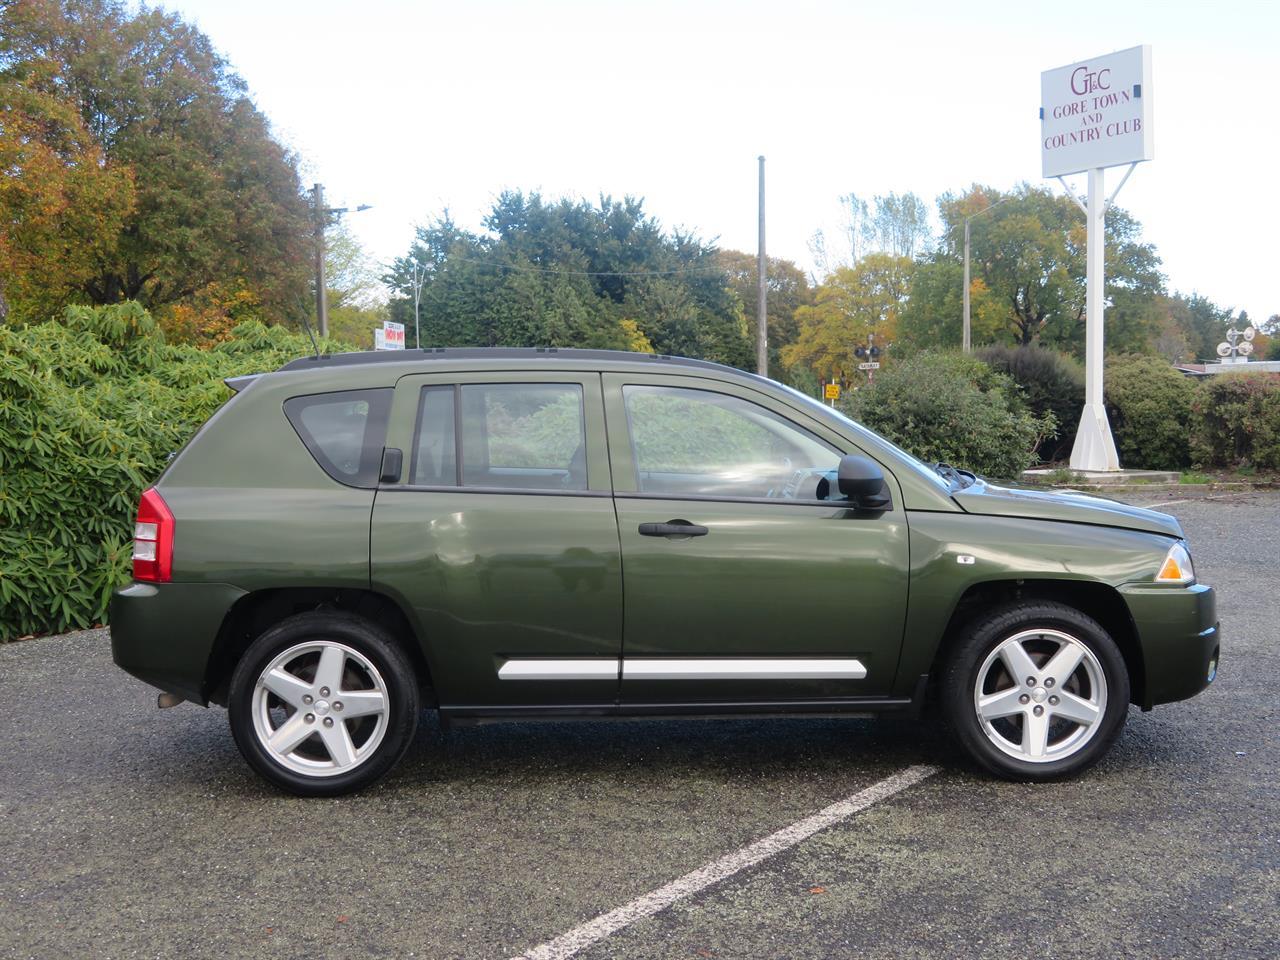 image-5, 2009 Jeep Compass Limited 4x4 at Gore